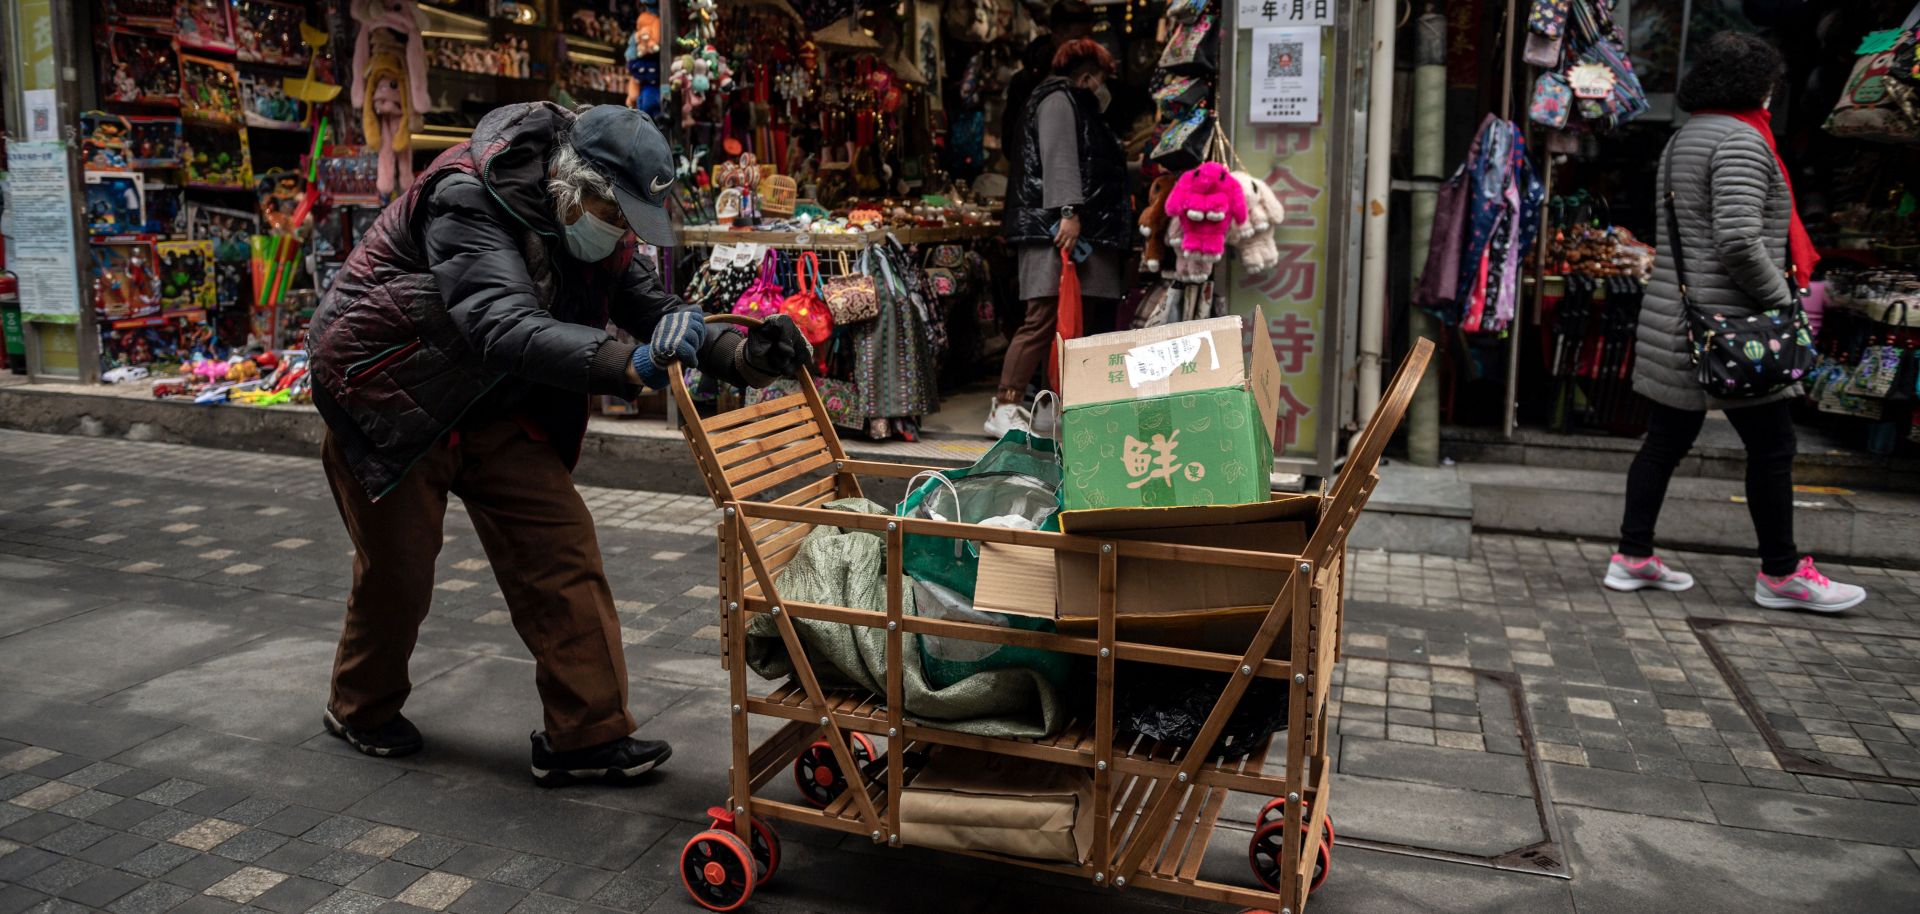 A woman pushes a cart down a street in Beijing, China, on March 5, 2021.